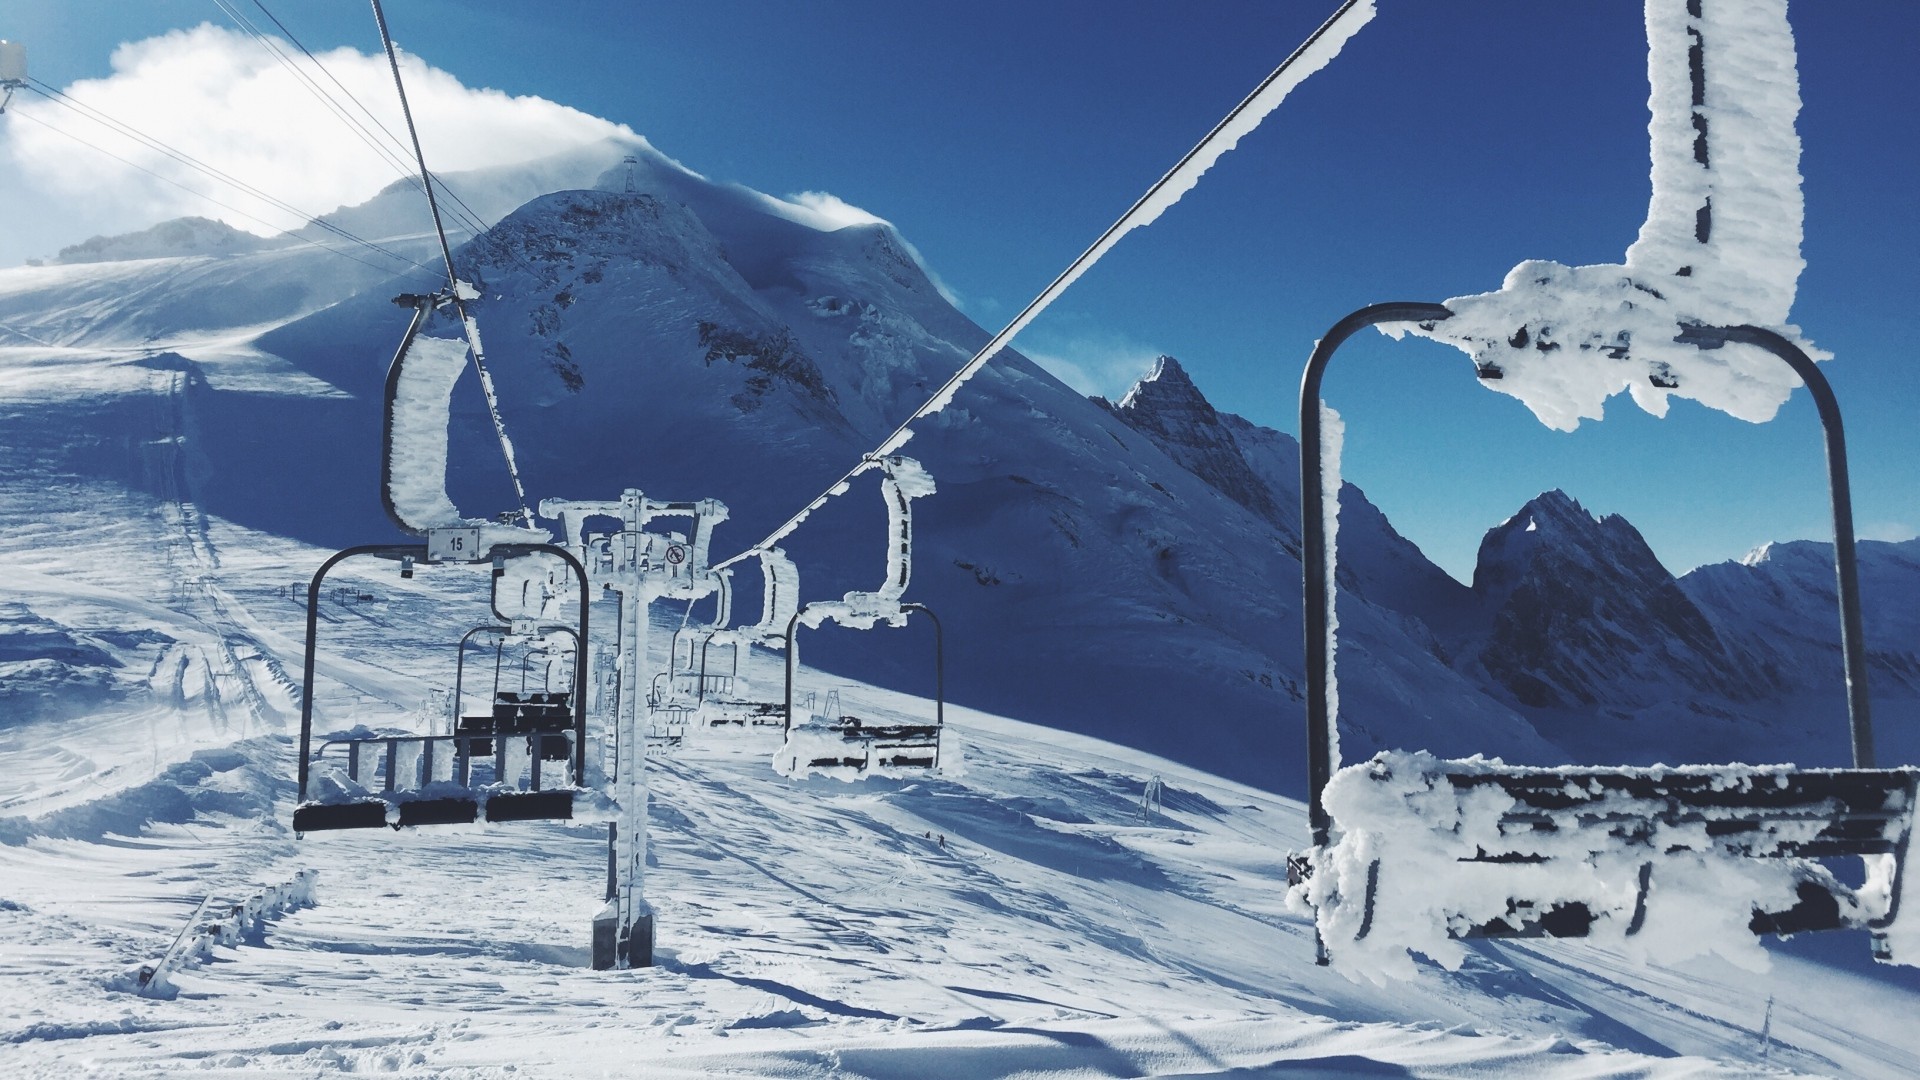 General 1920x1080 snow winter ski lifts mountains funicular ice cold snowy peak snowy mountain